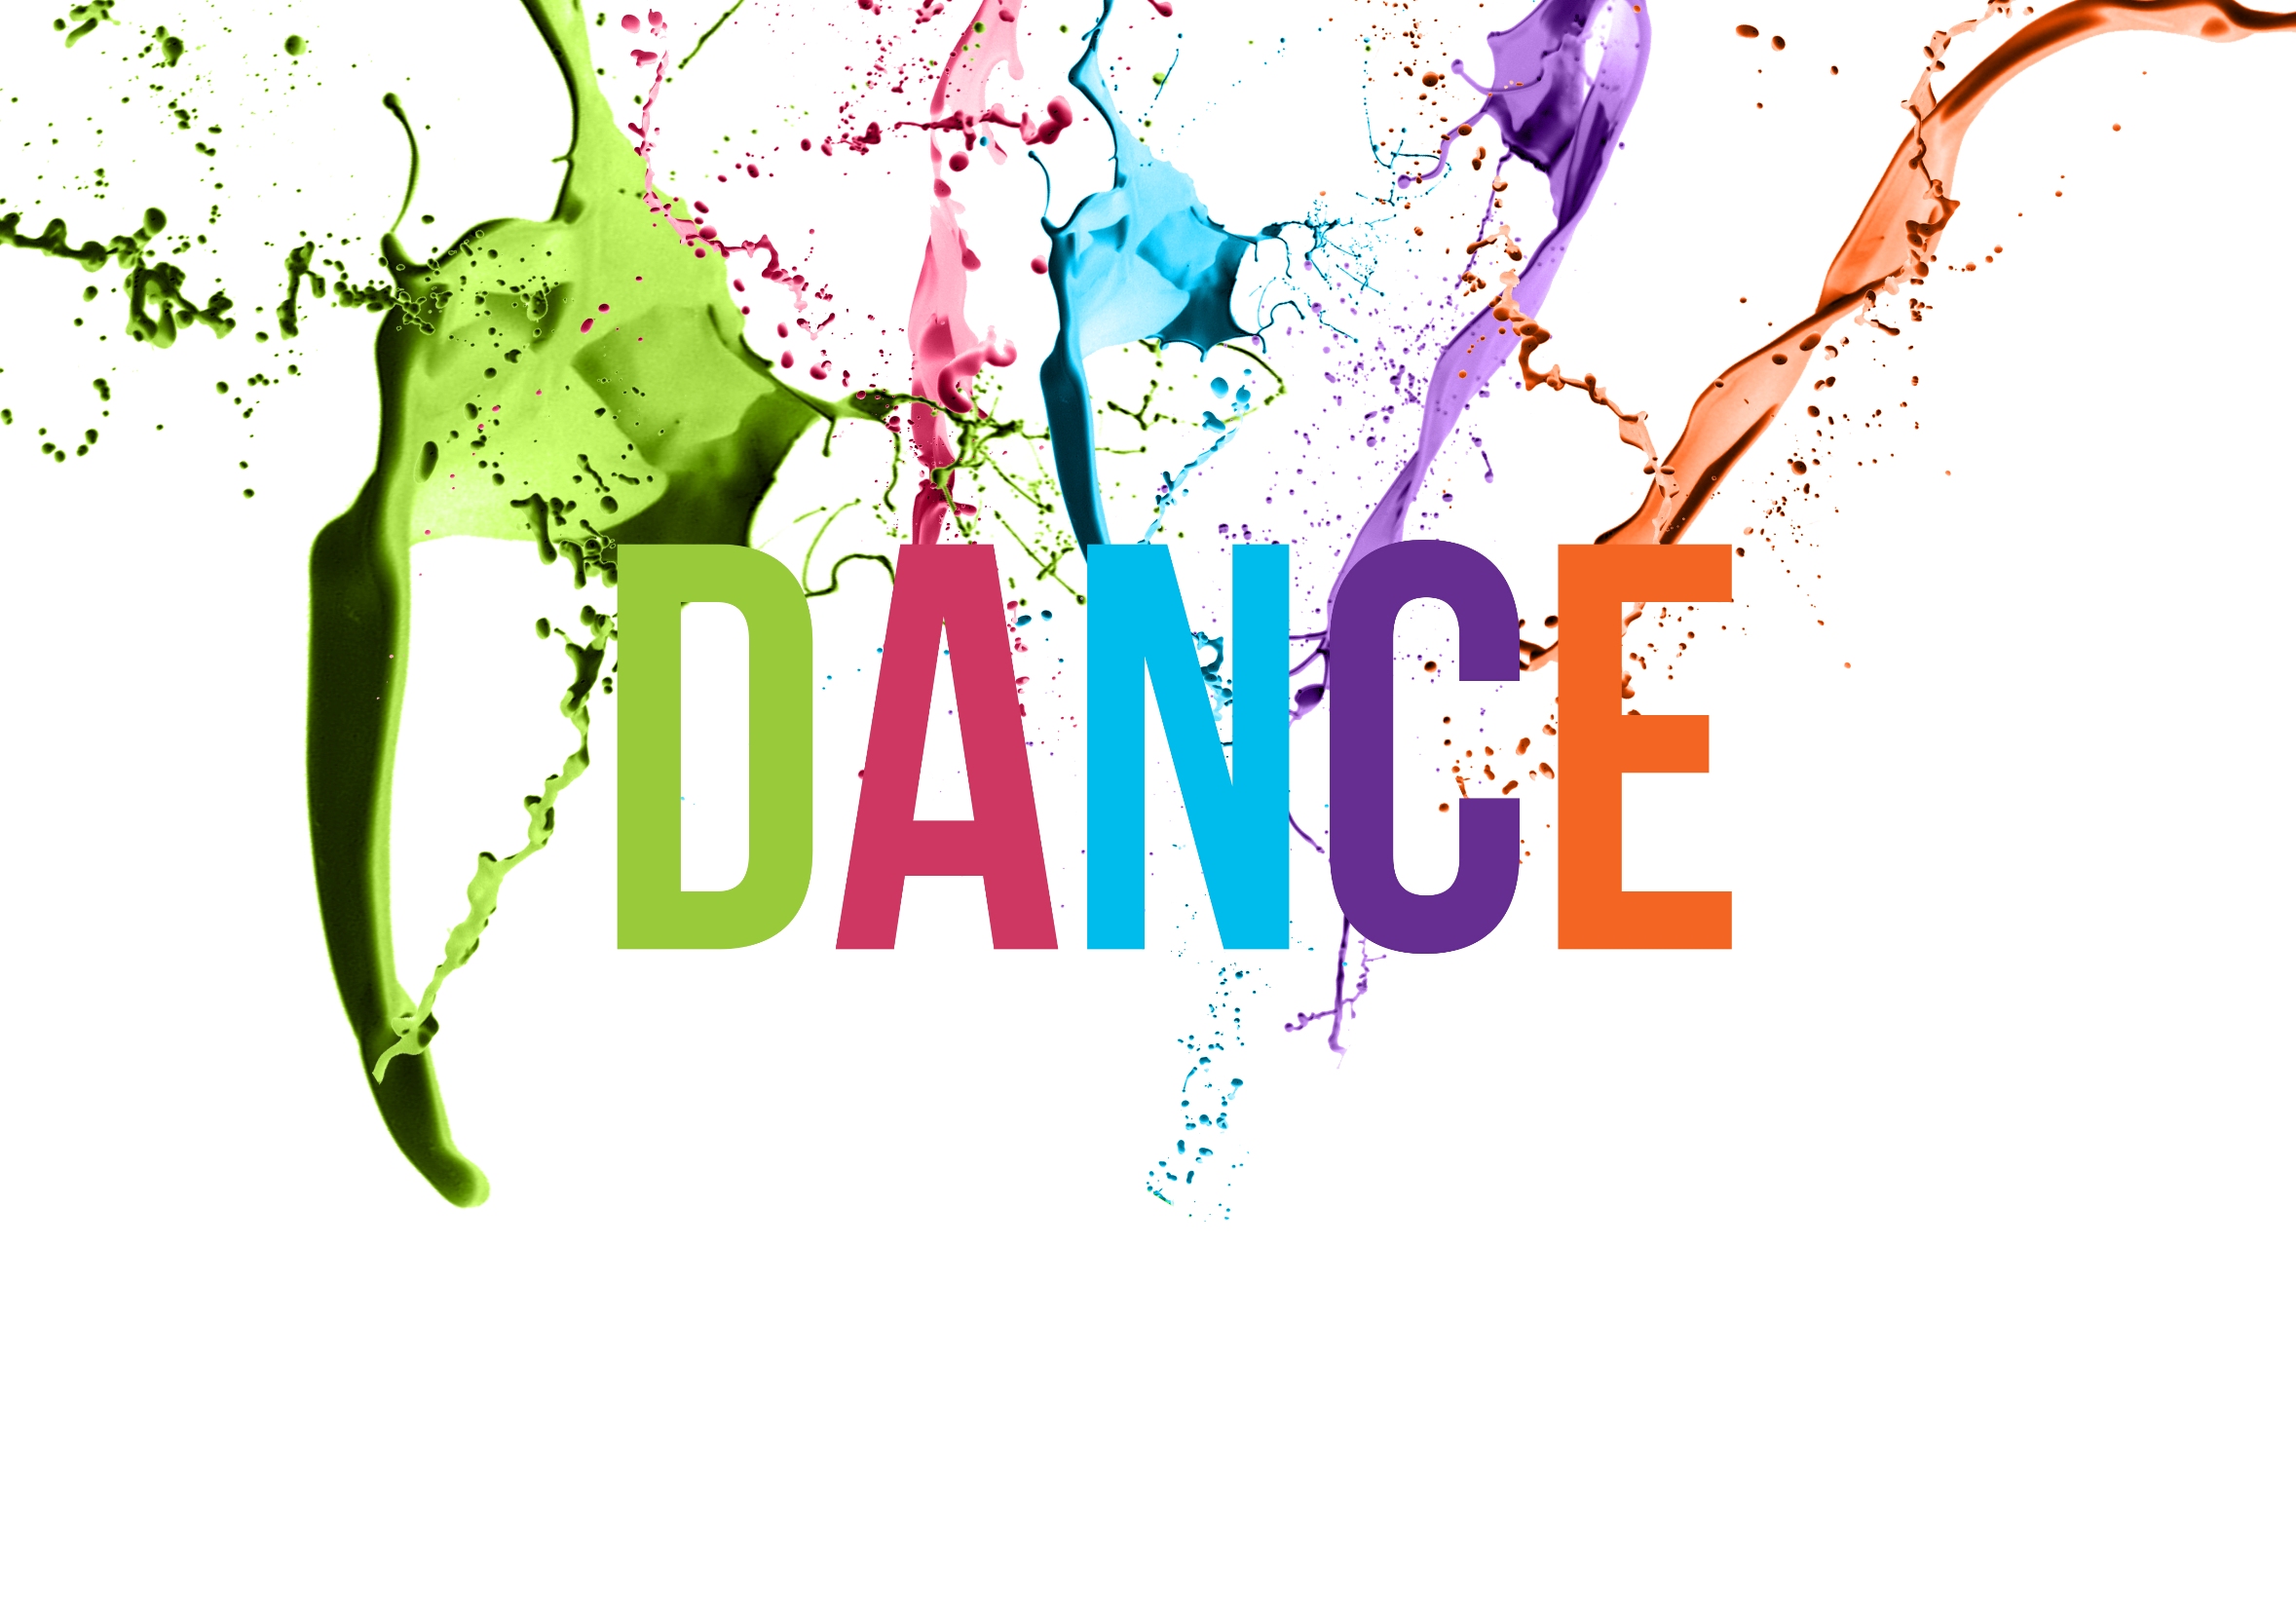 Colorful paint spelling out the word "dance" on a canvas.